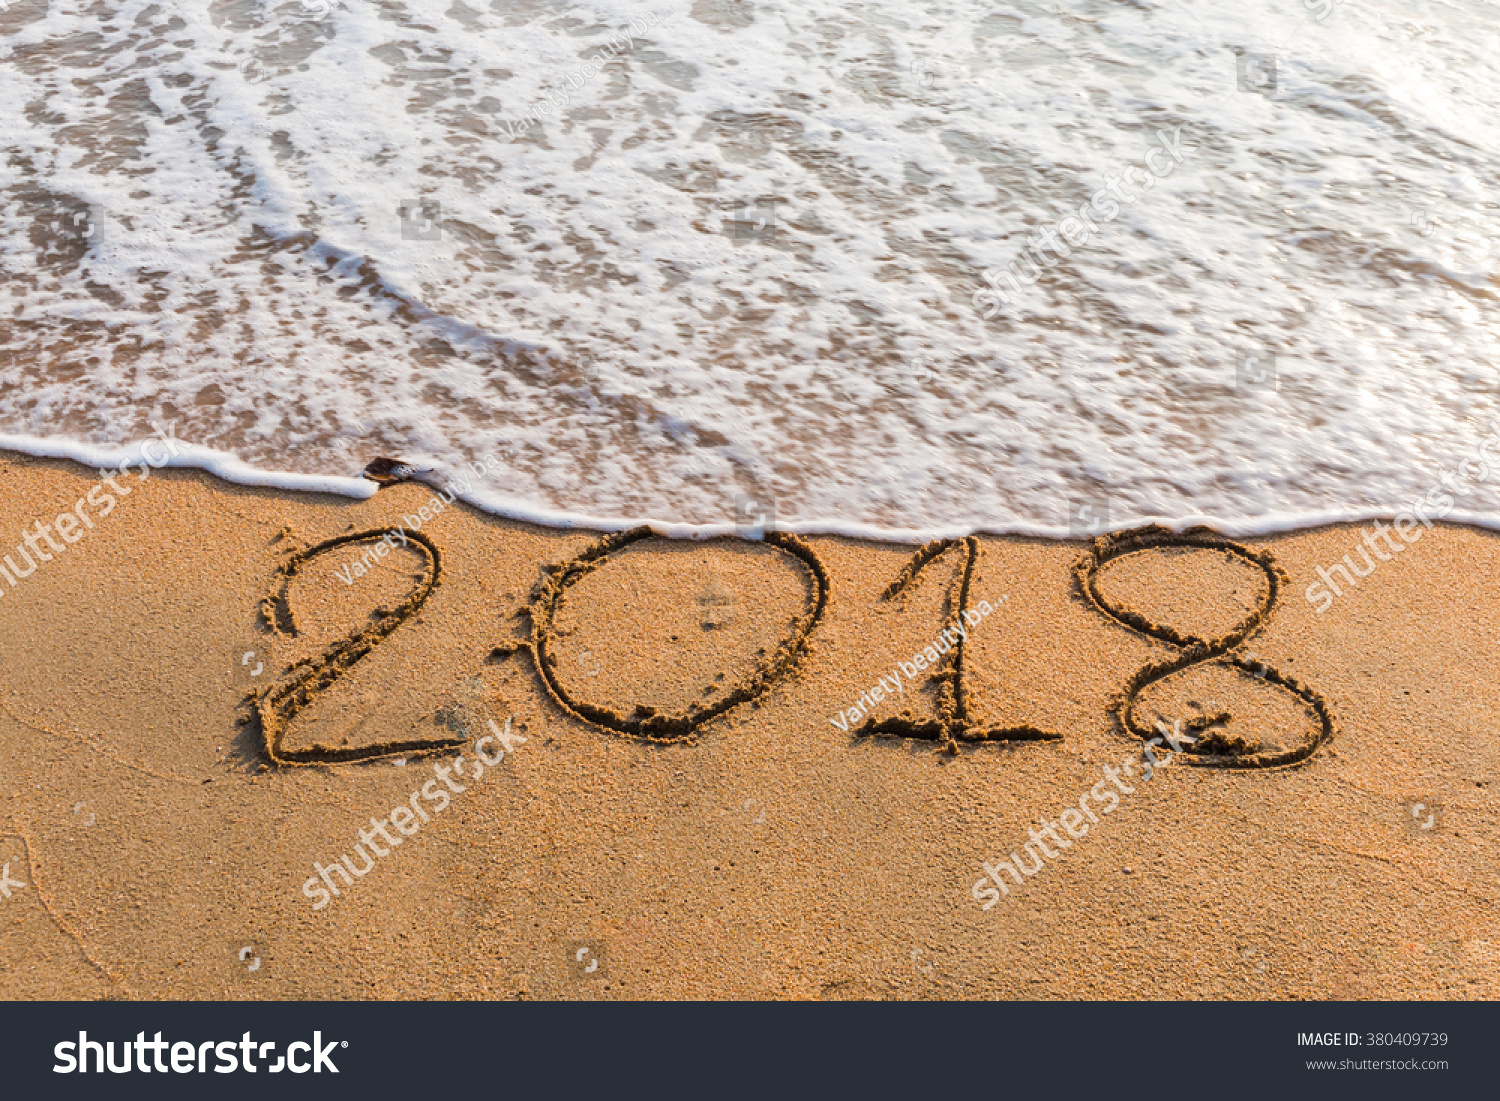 New Year 2018 is coming concept - write  2018 on a beach sand #380409739